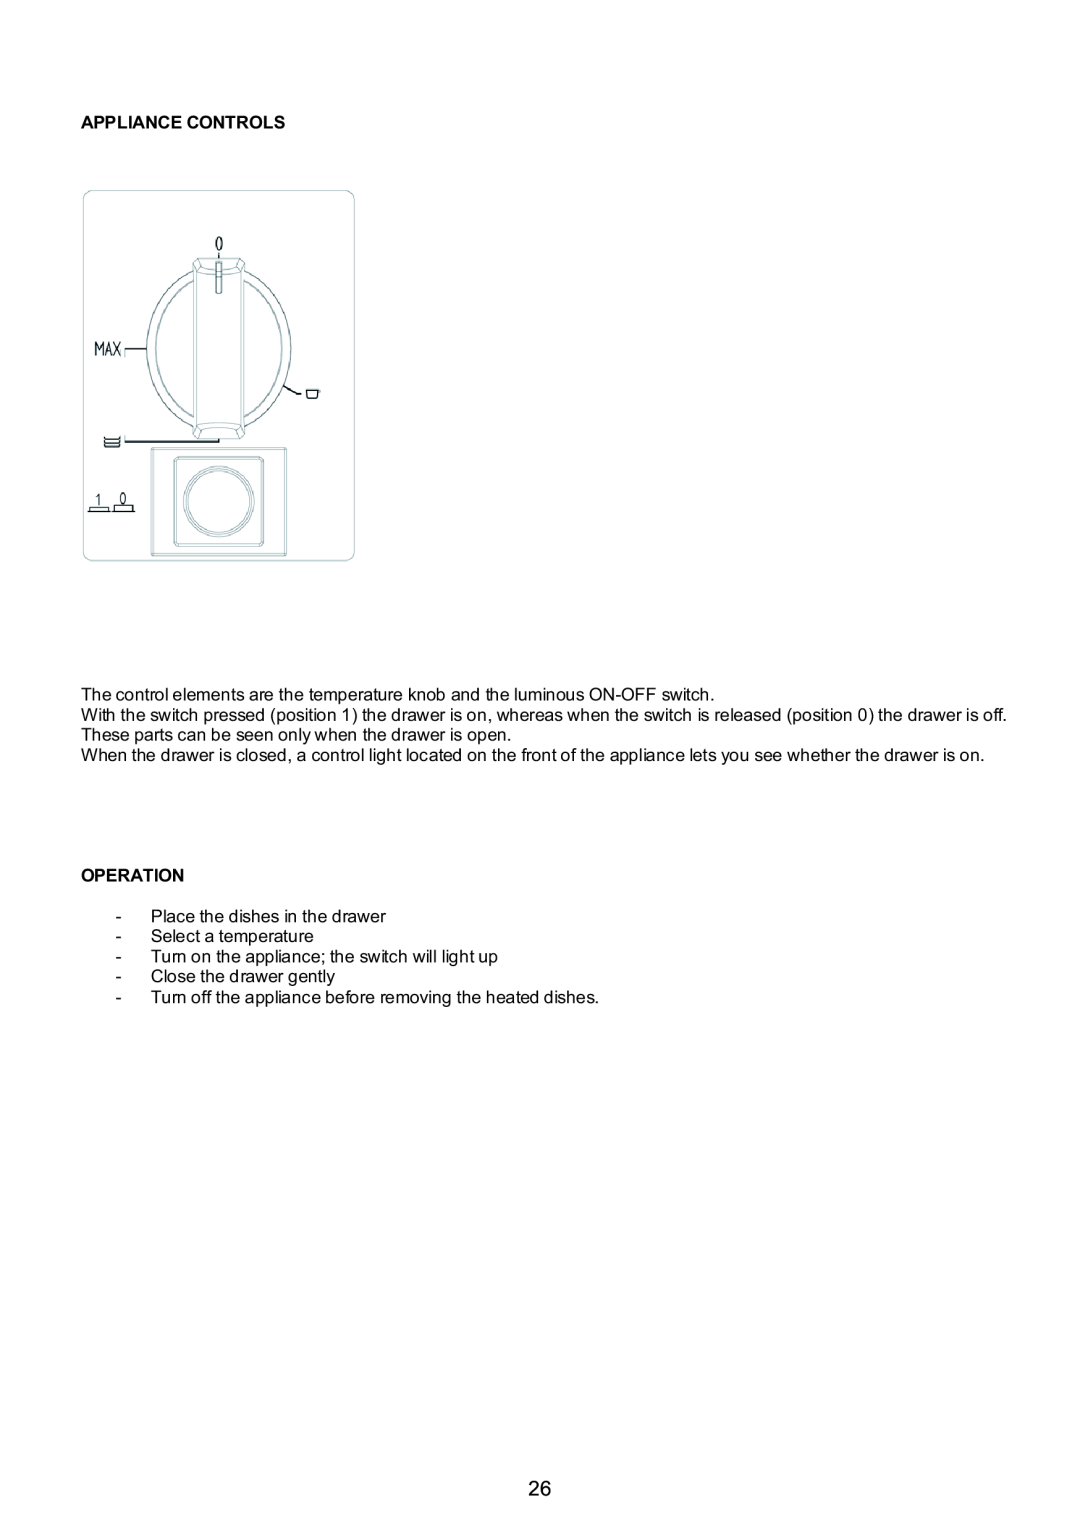 Foster cod.7138 000 user manual Appliance Controls, Operation 